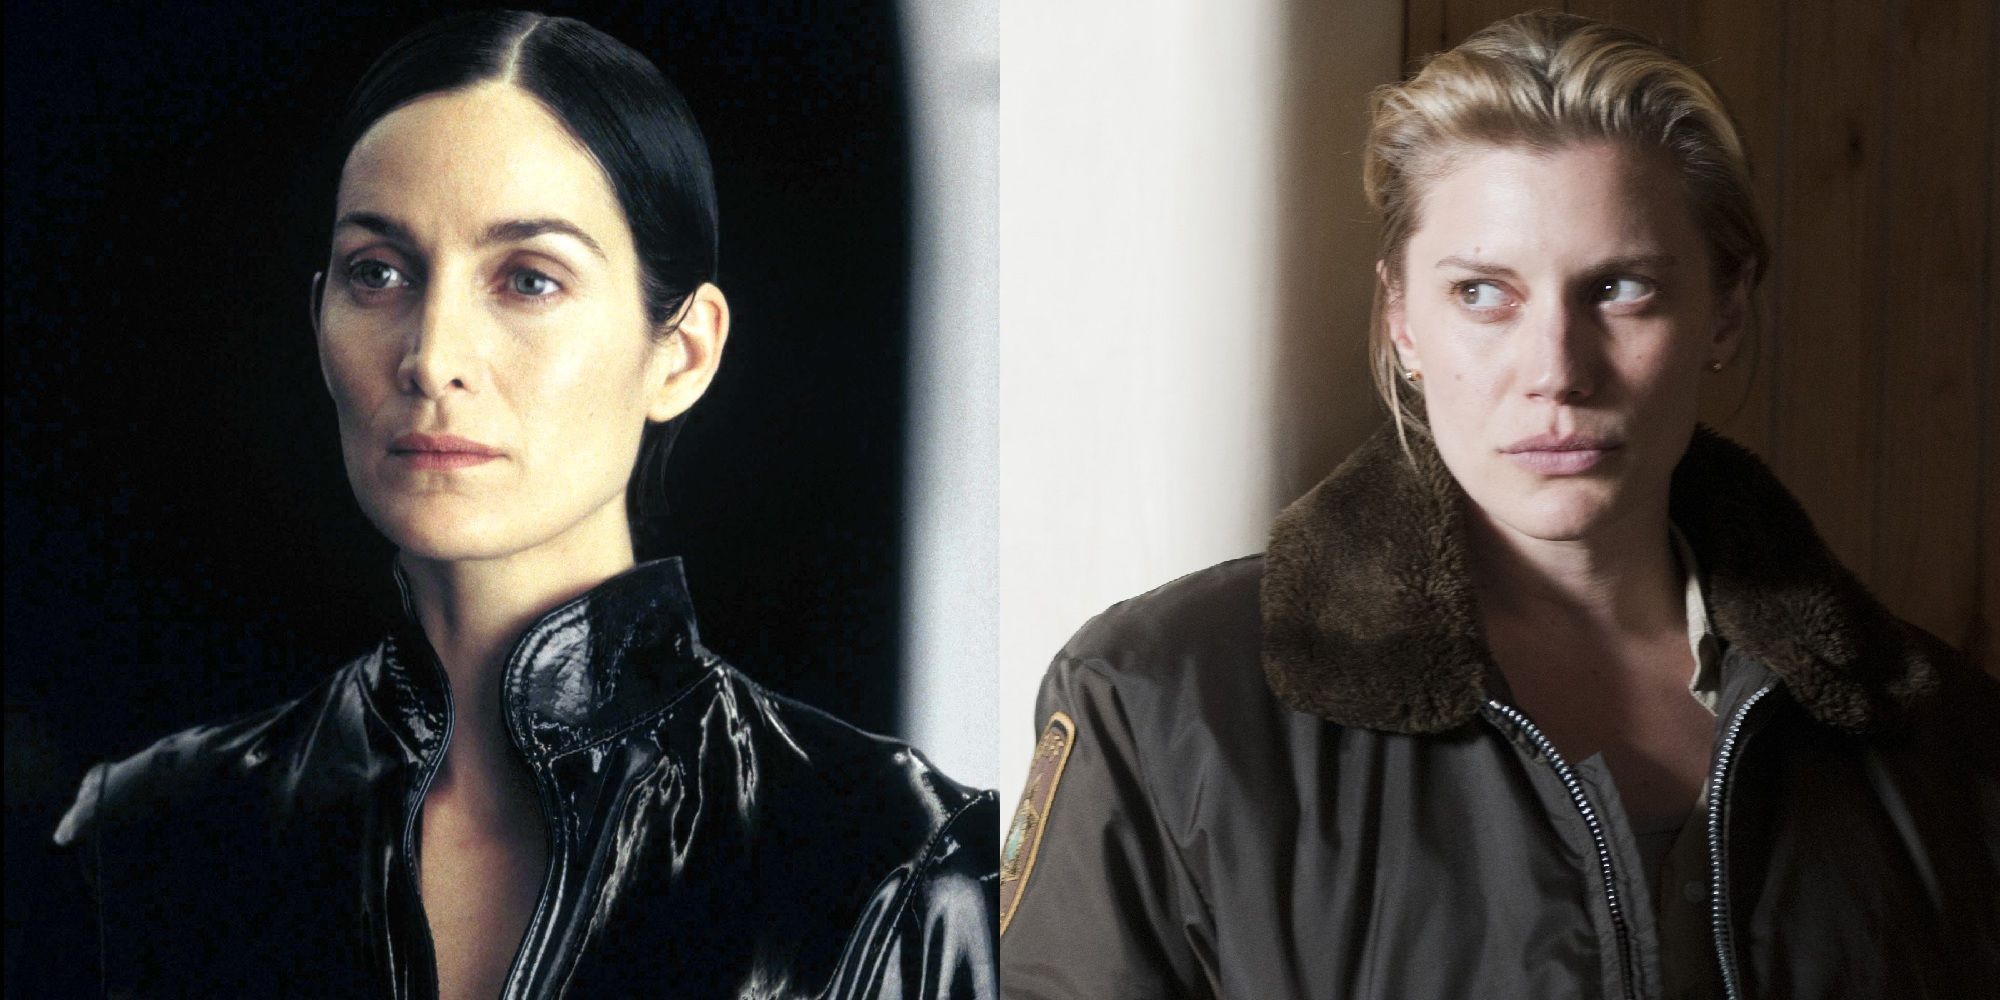 Carrie Ann Moss as Trinity in The Matrix, with Katee Sackhoff in Longmire